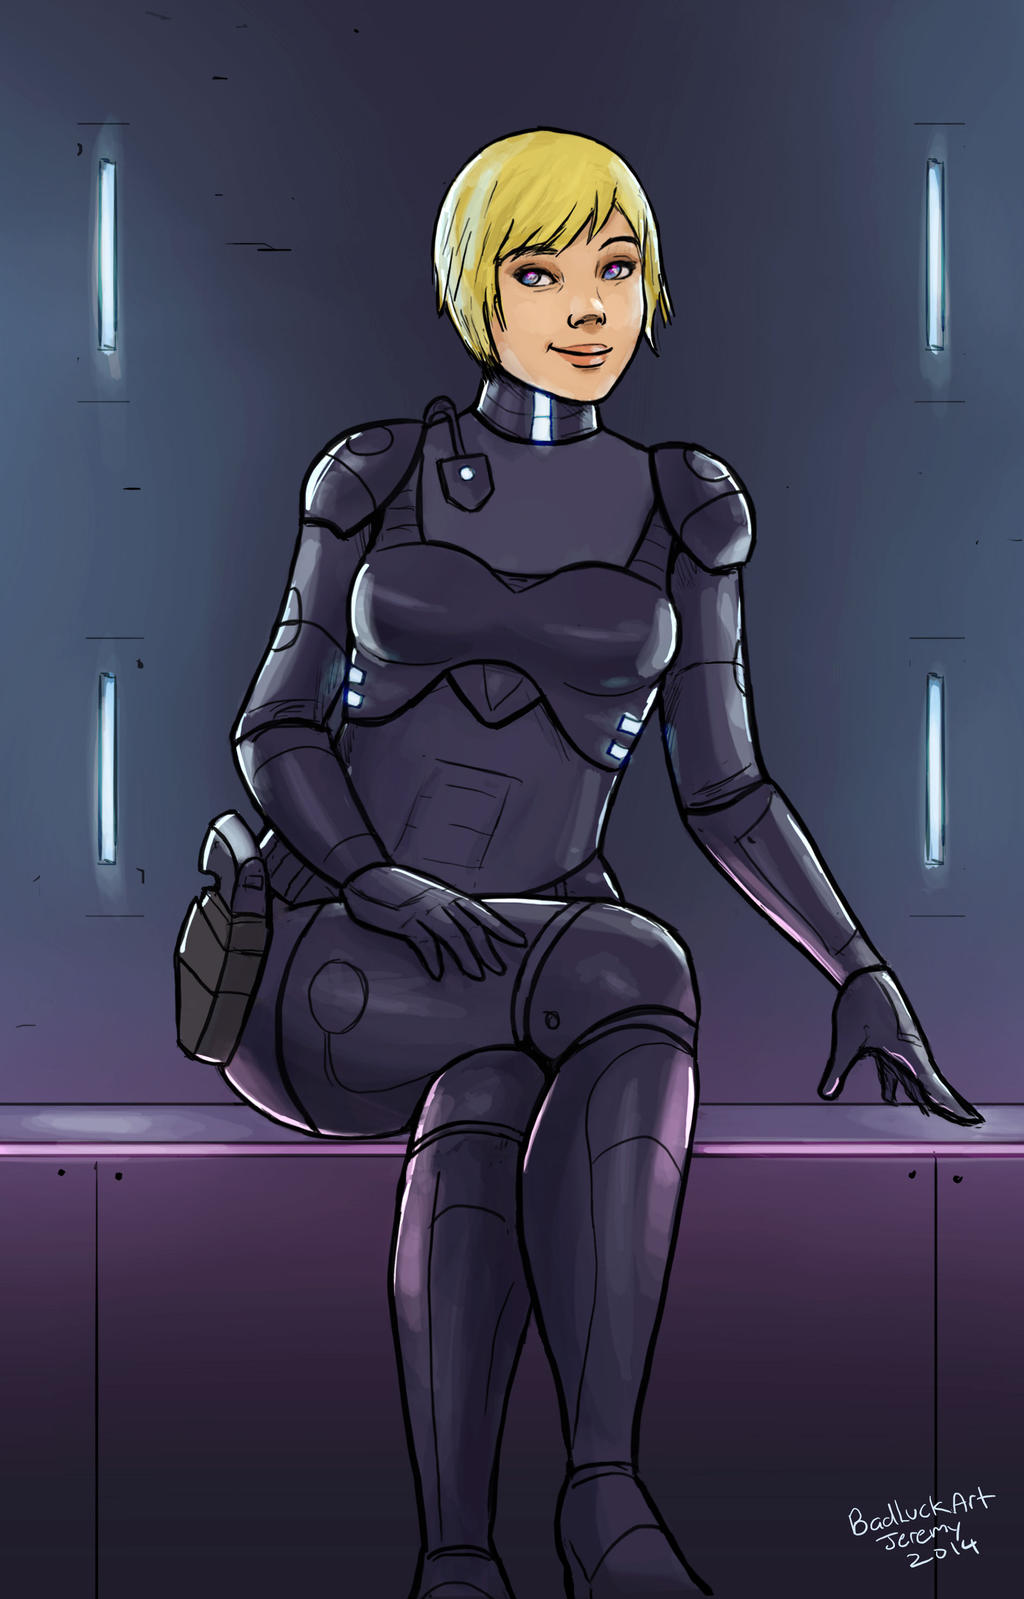 Cybercity Knights - Comic Panel Test 1, Ember